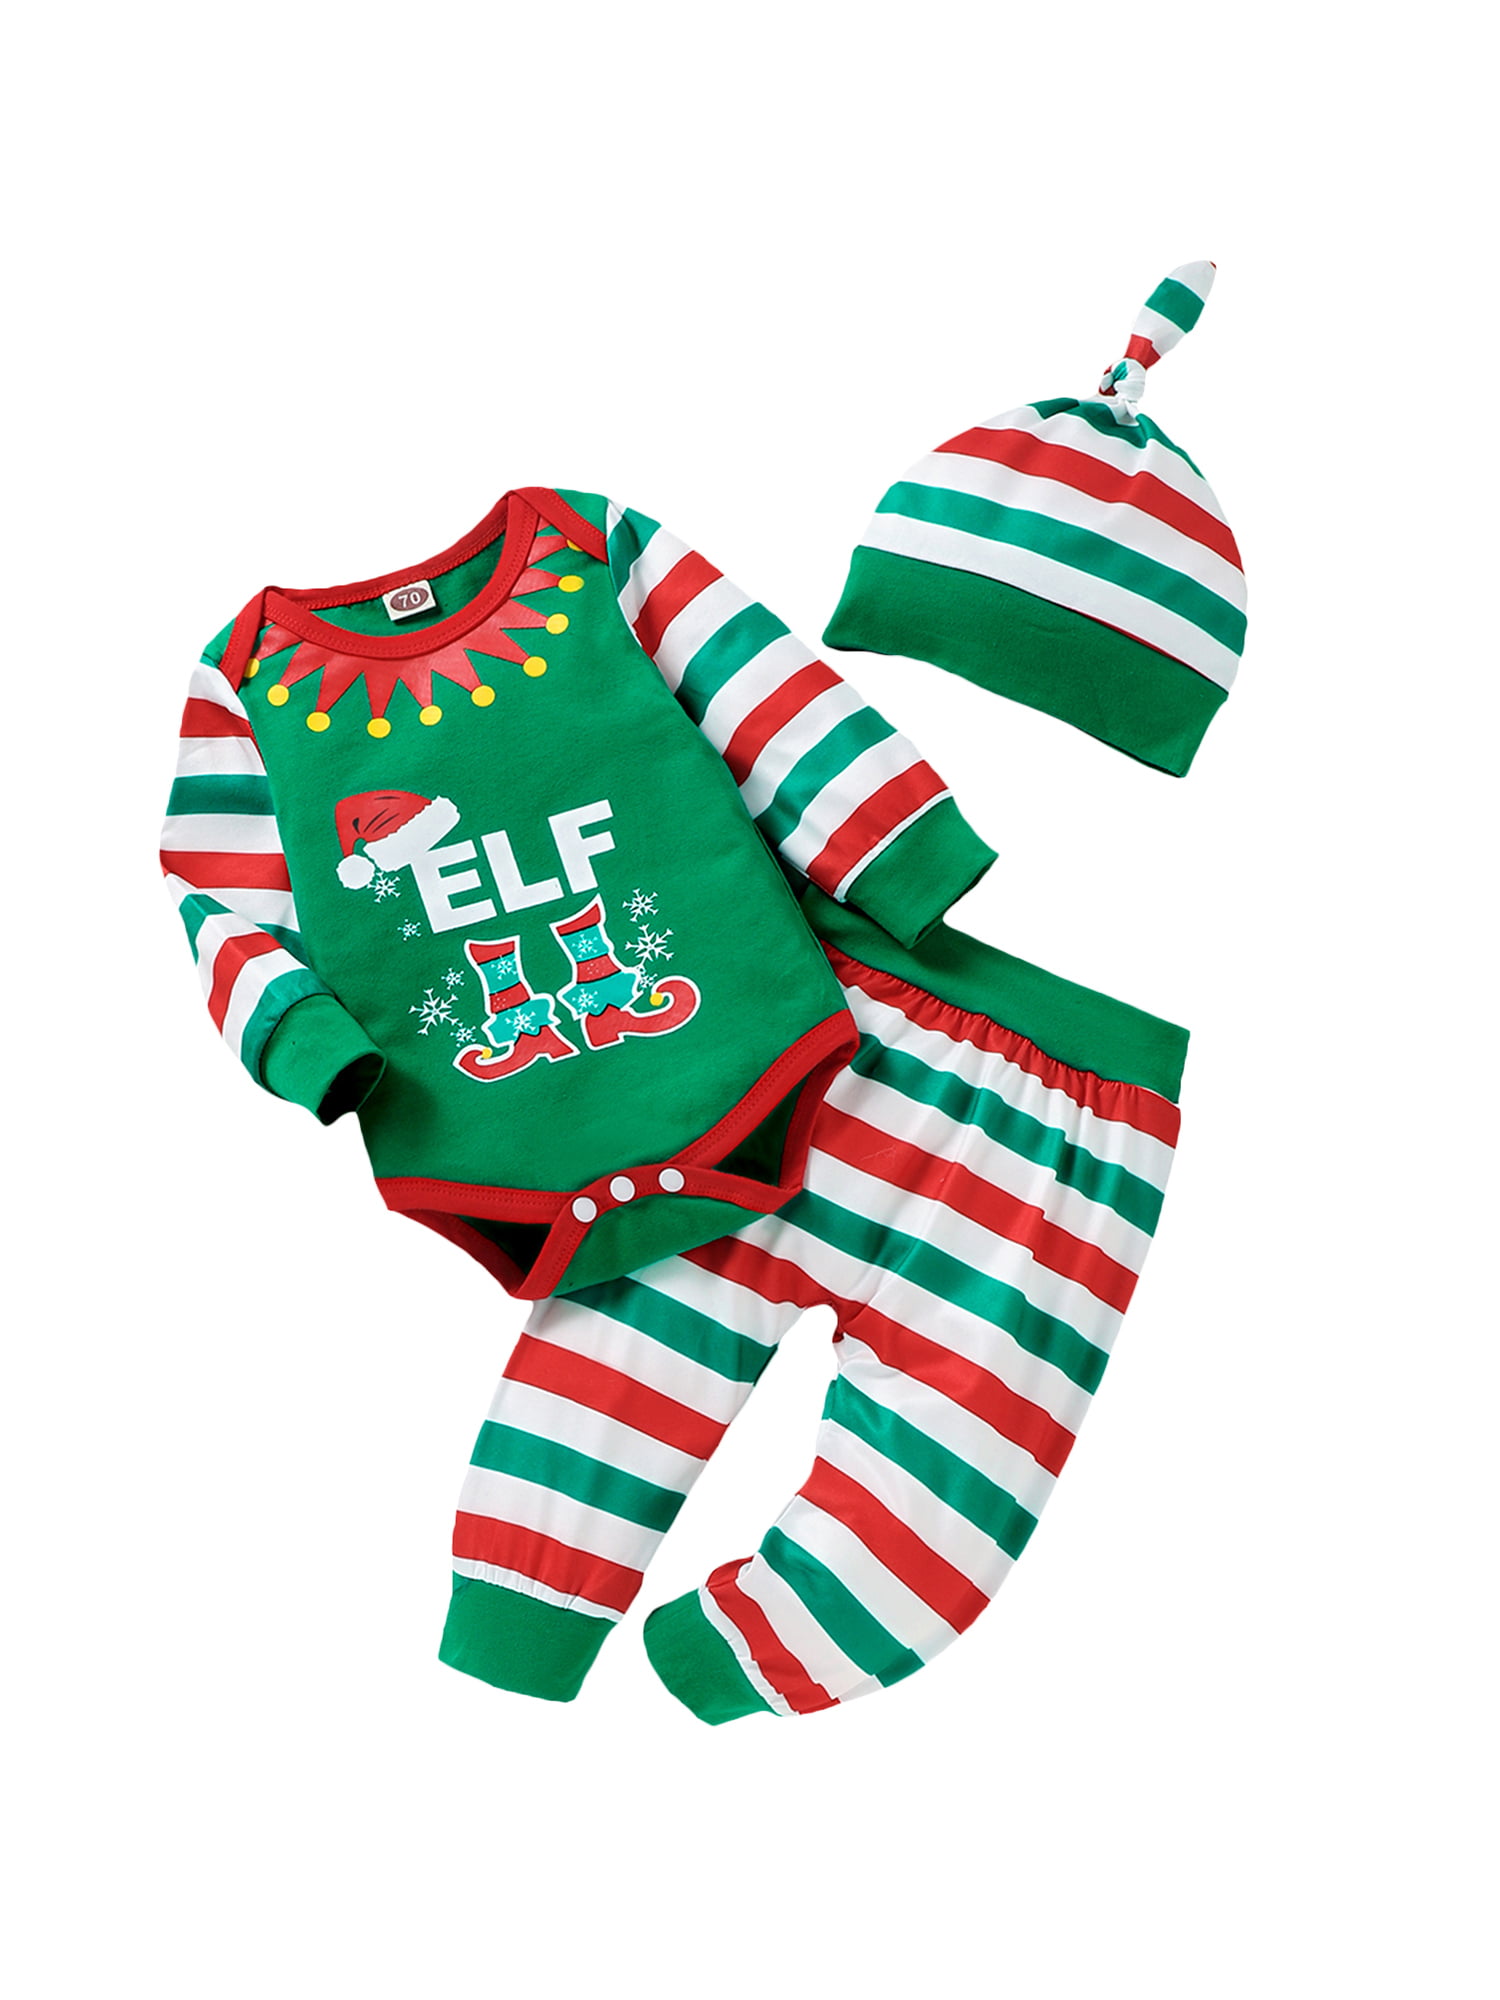 Infant Baby Boys Girls Christmas Xmas Romper Bodysuit+Striped Pants Hats Outfits 